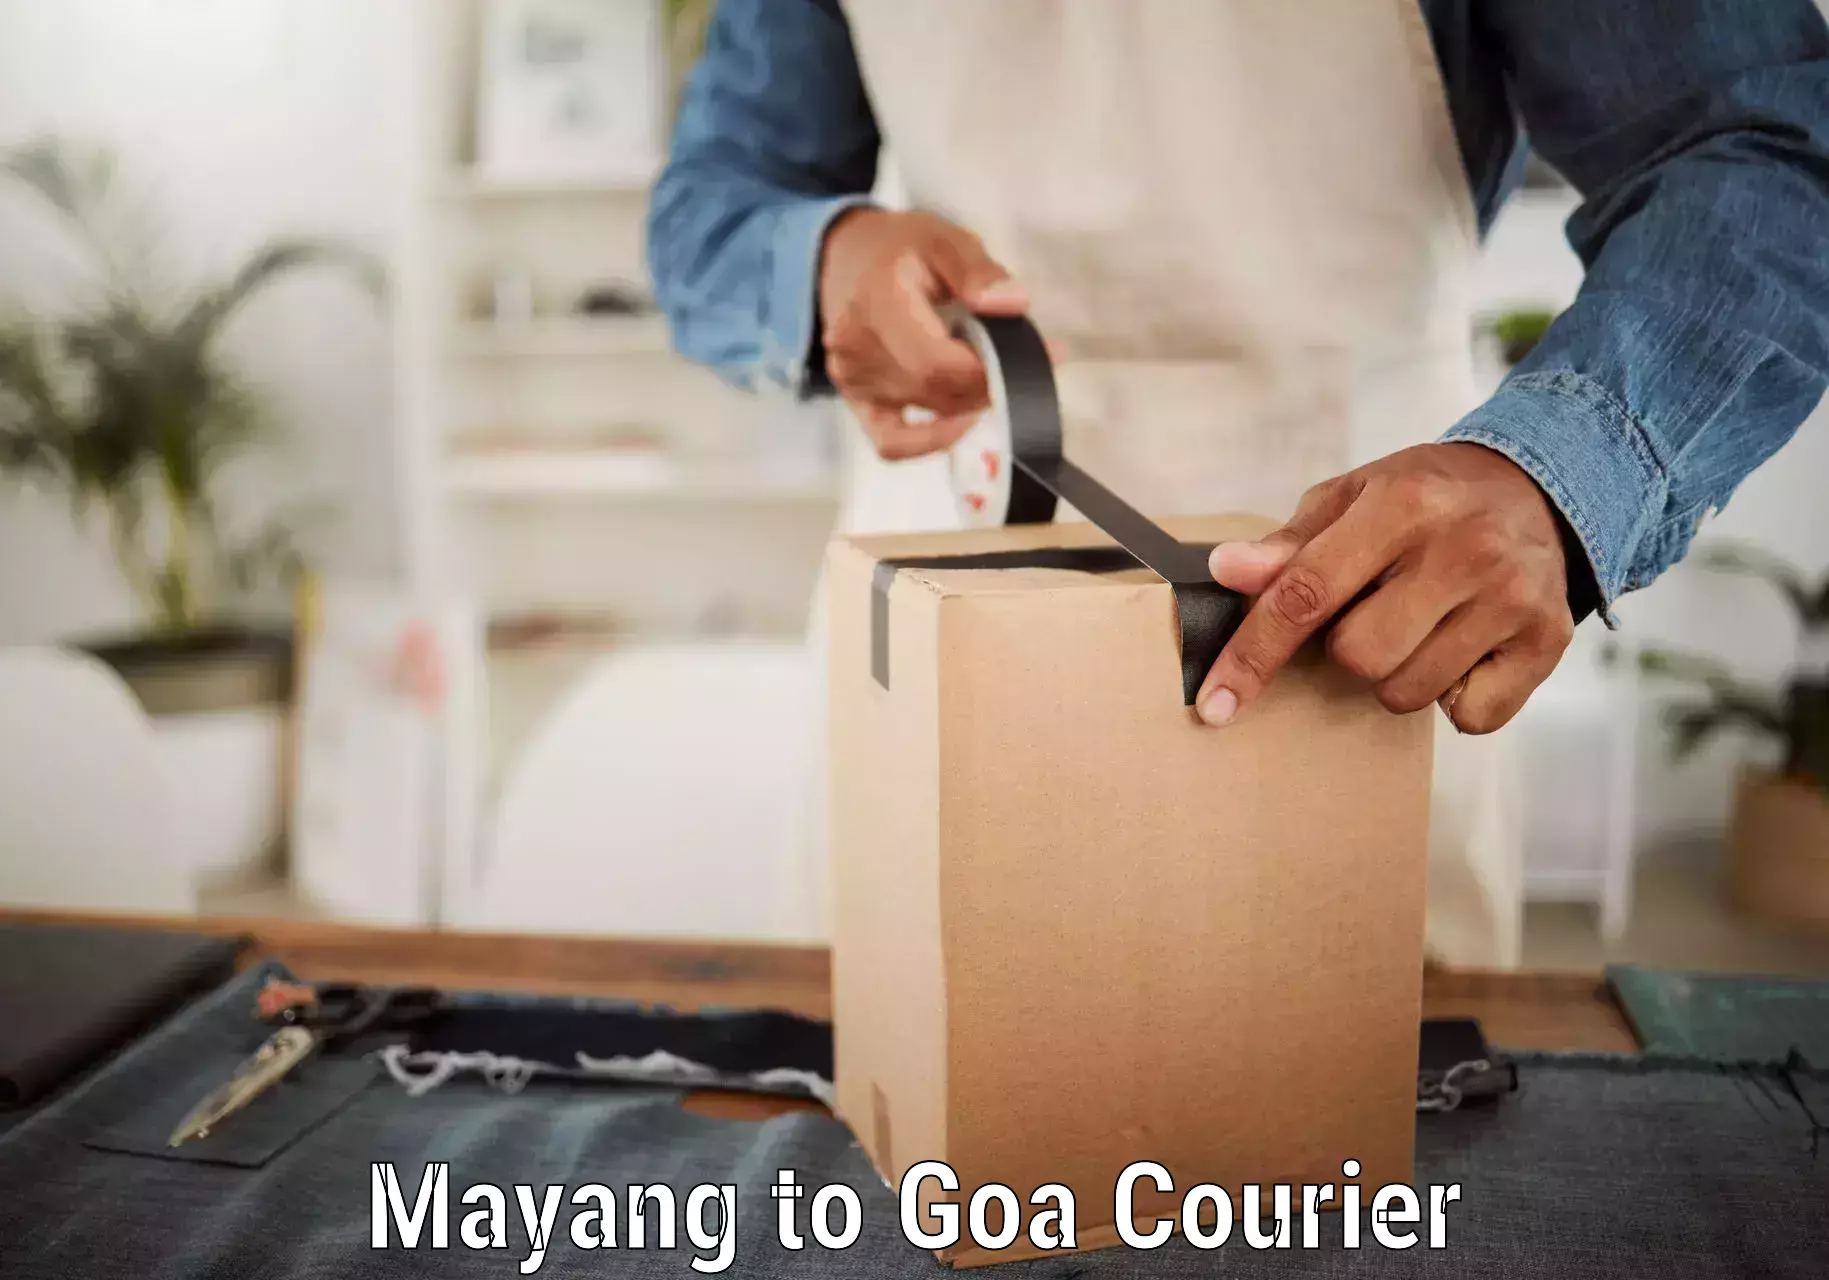 Efficient logistics management in Mayang to Goa